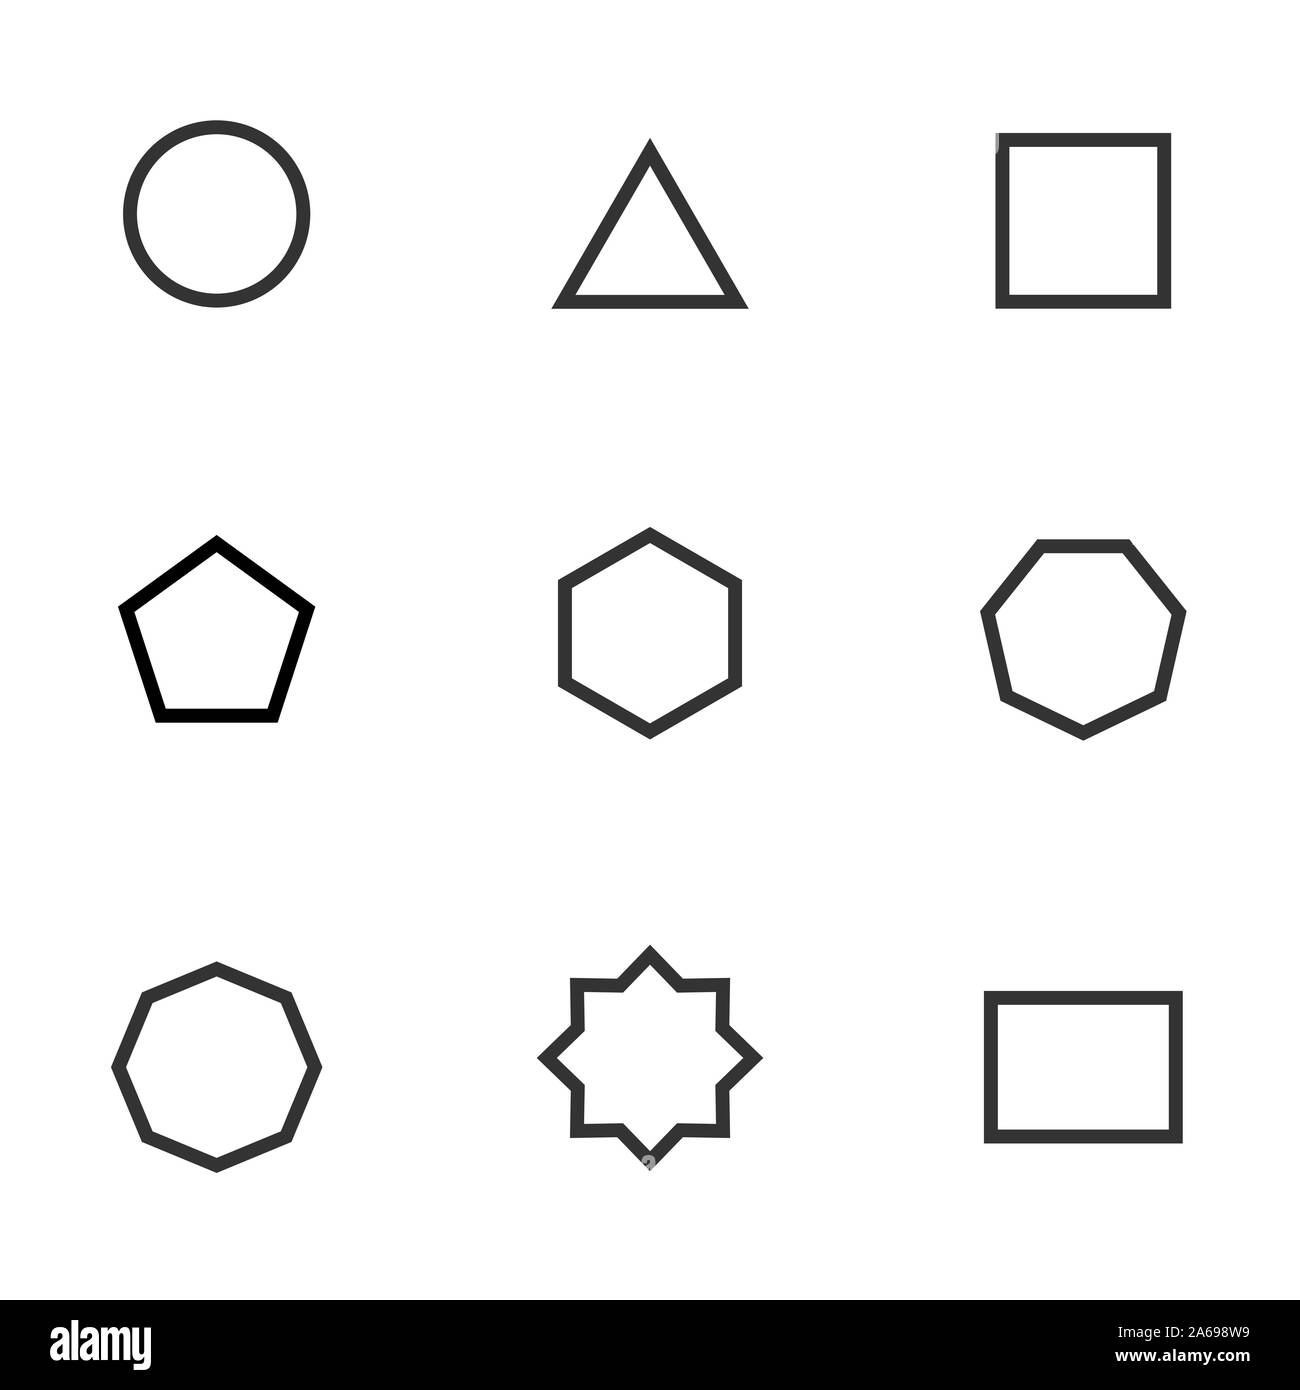 Set of black and white geometric shape. Simple geometric figures icon collection. Linear icon flat style, vector illustration Stock Vector